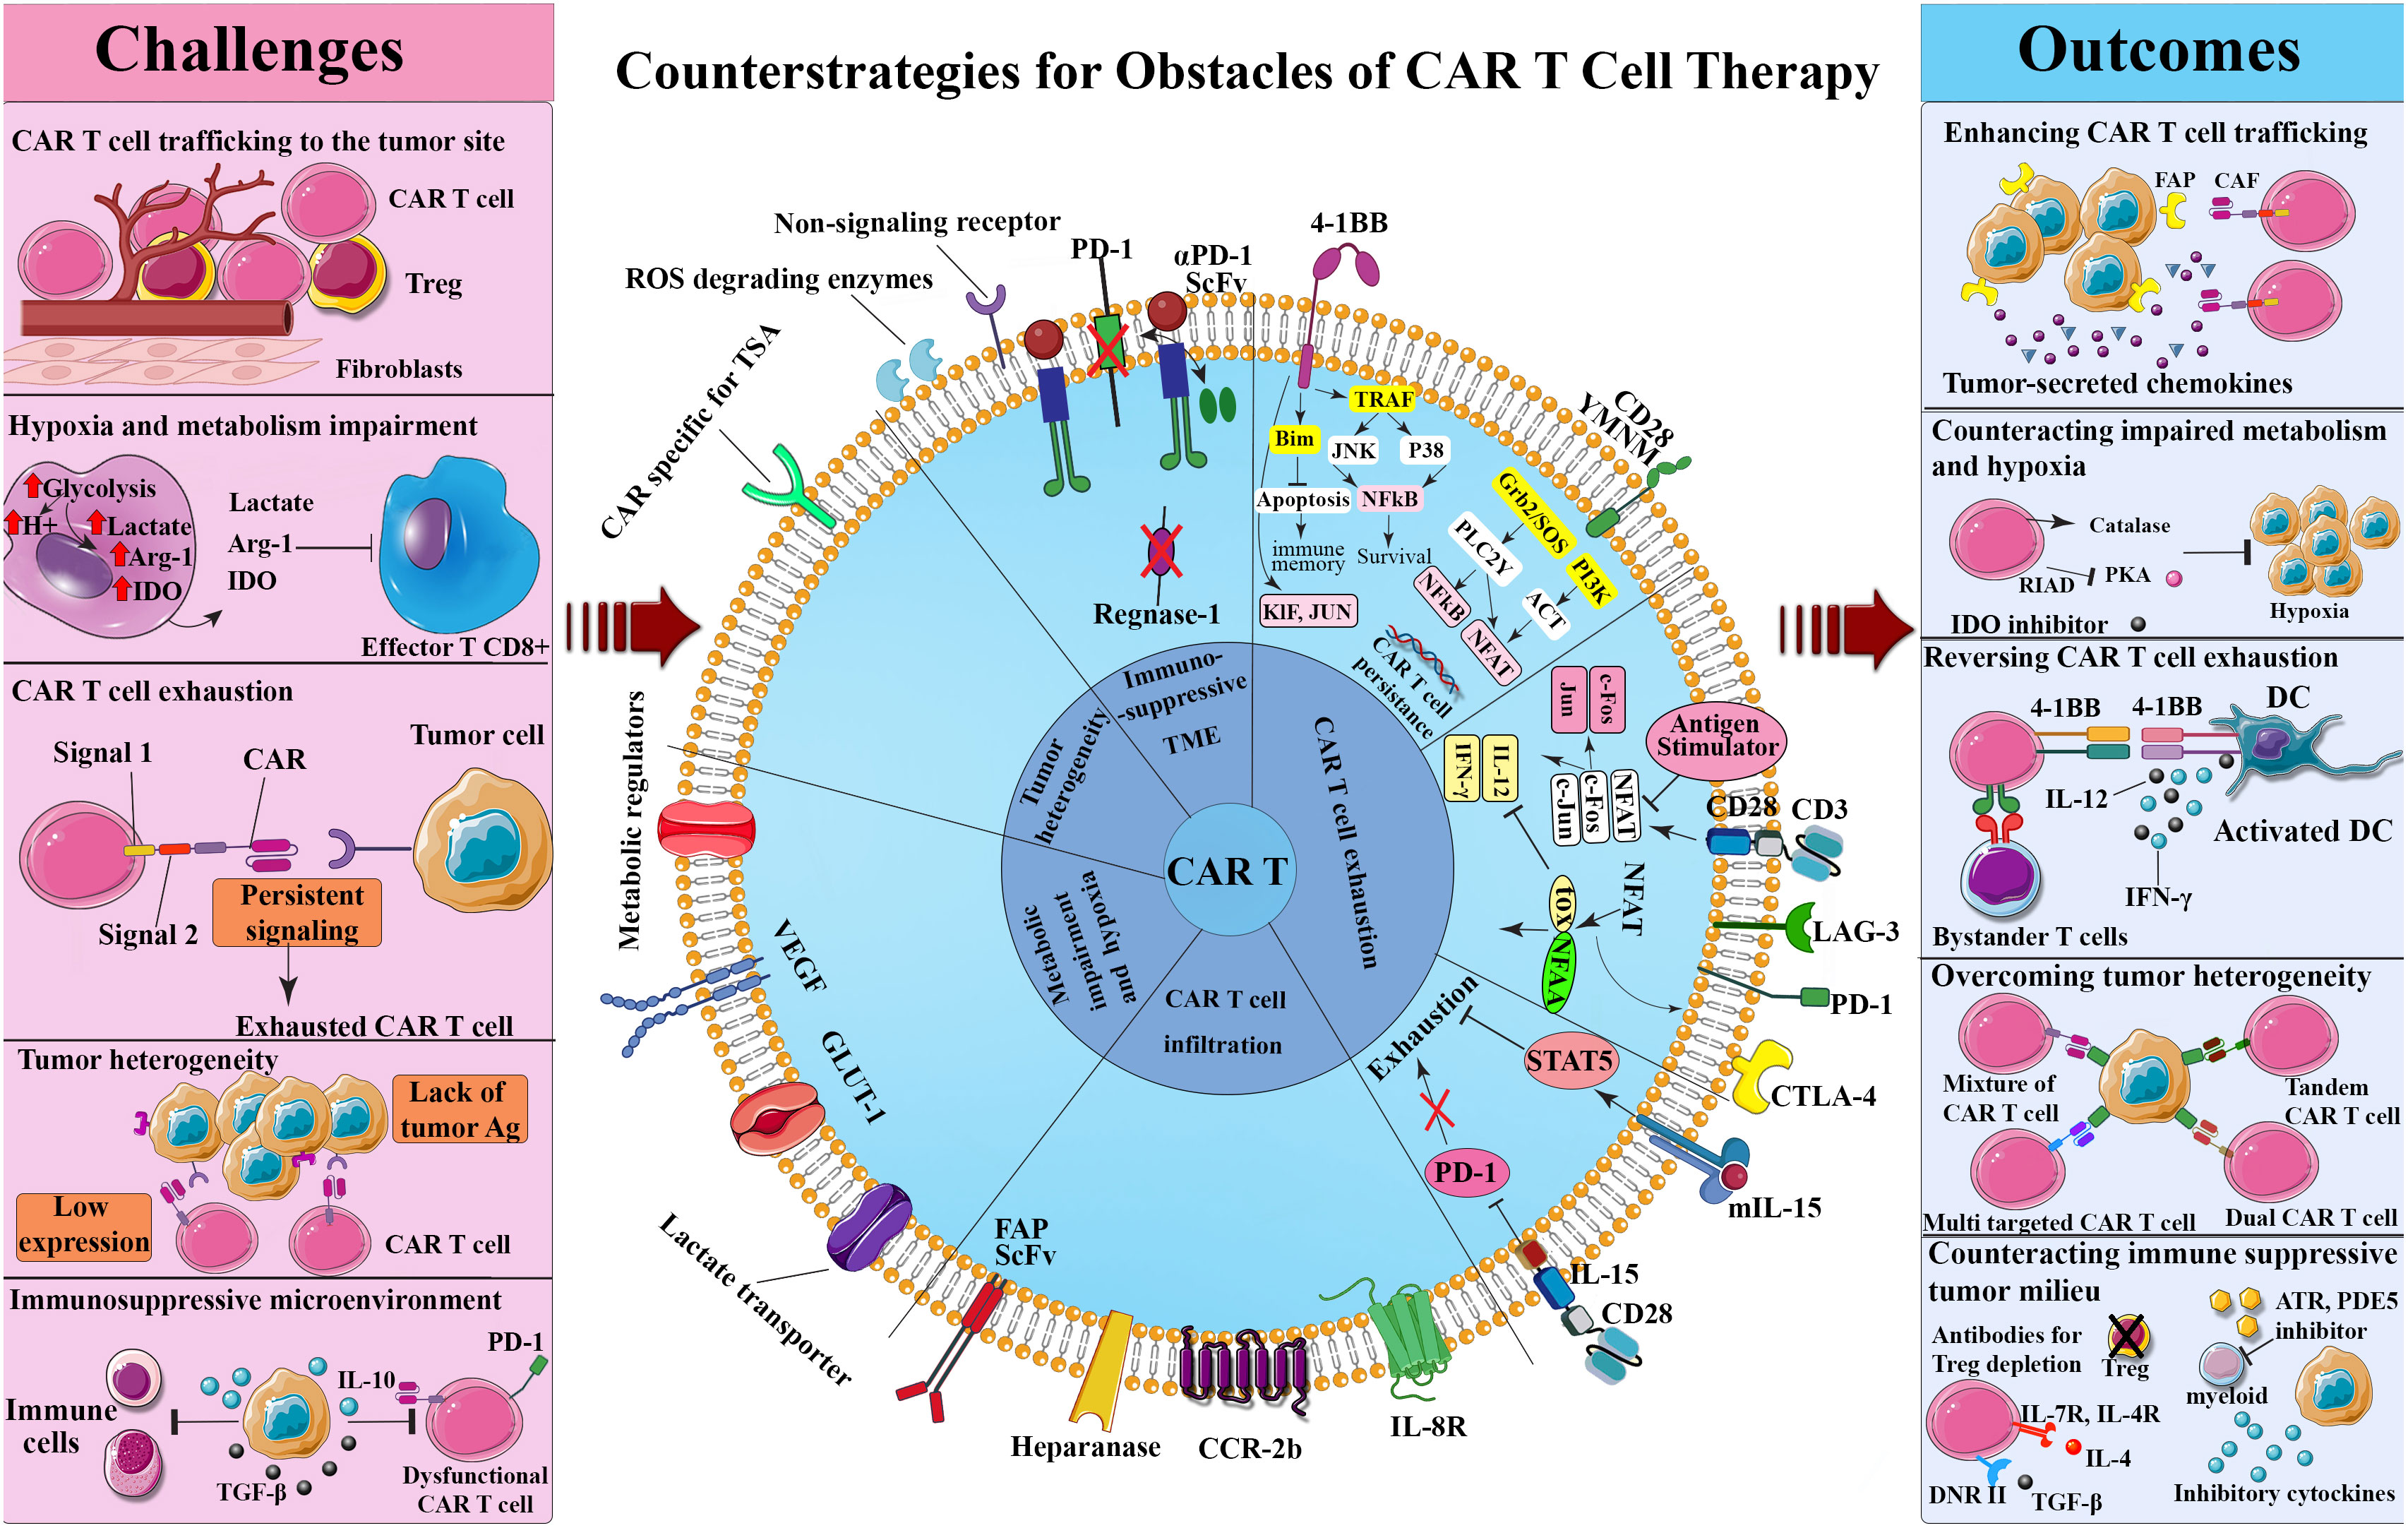 Frontiers  The current landscape of CAR T-cell therapy for solid tumors:  Mechanisms, research progress, challenges, and counterstrategies